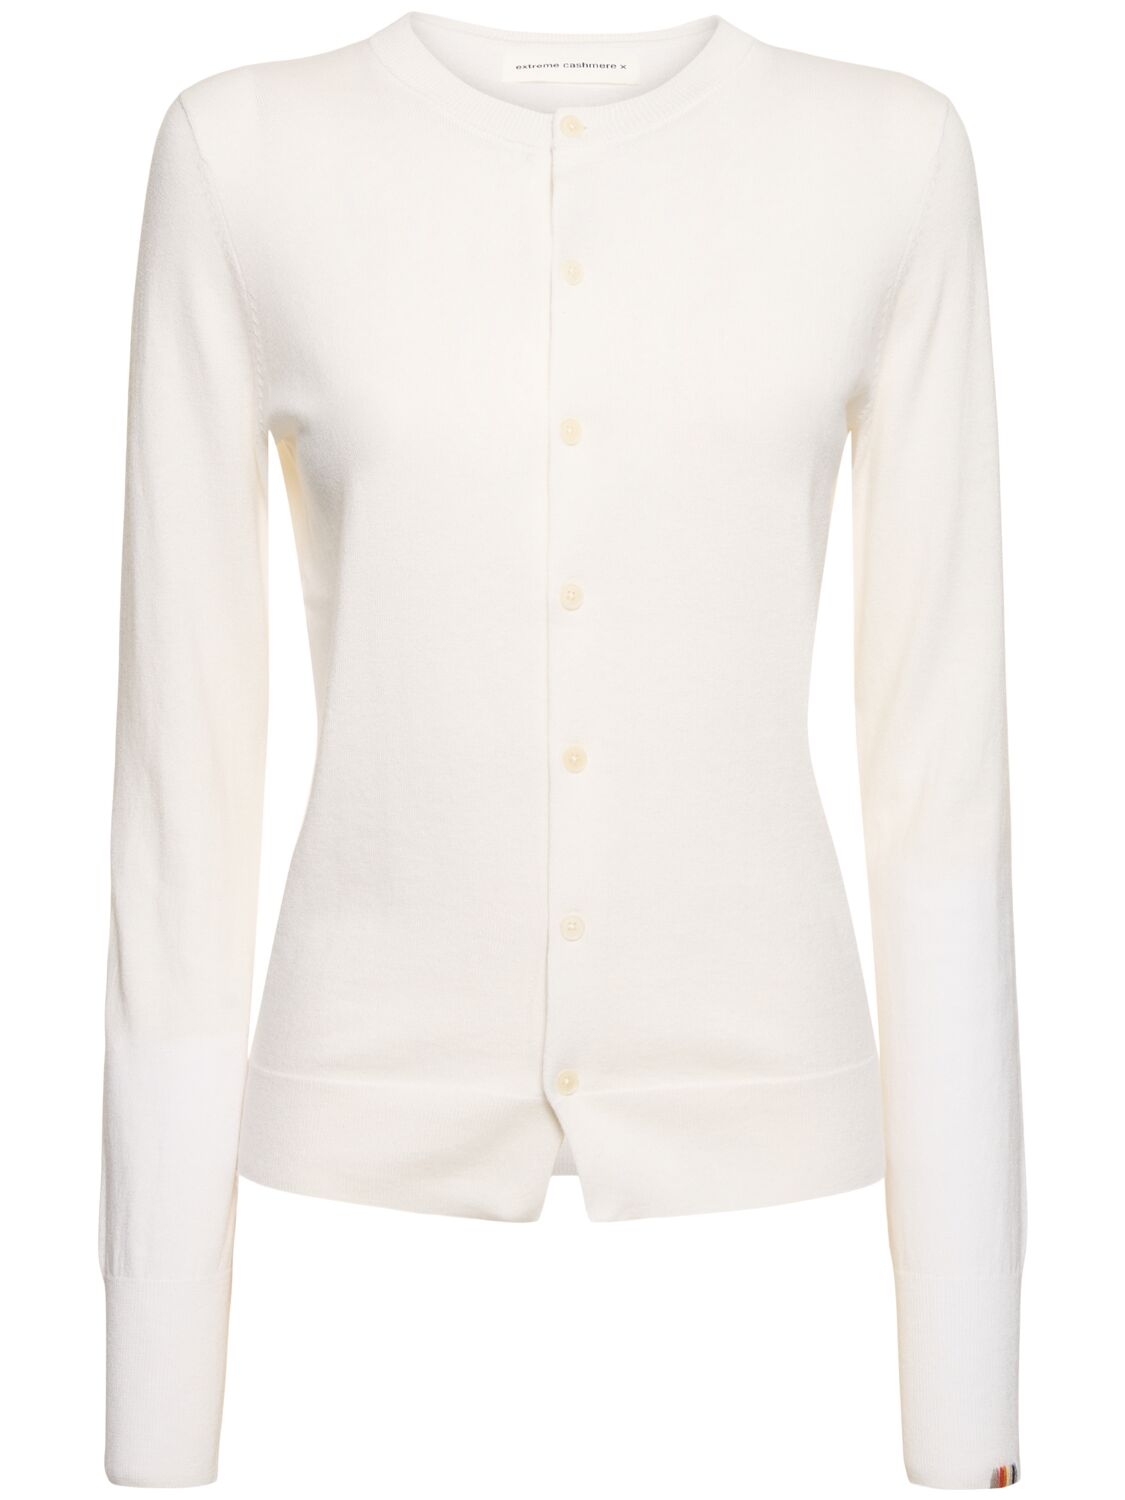 Extreme Cashmere A Little Bit Cotton & Cashmere Cardigan In White